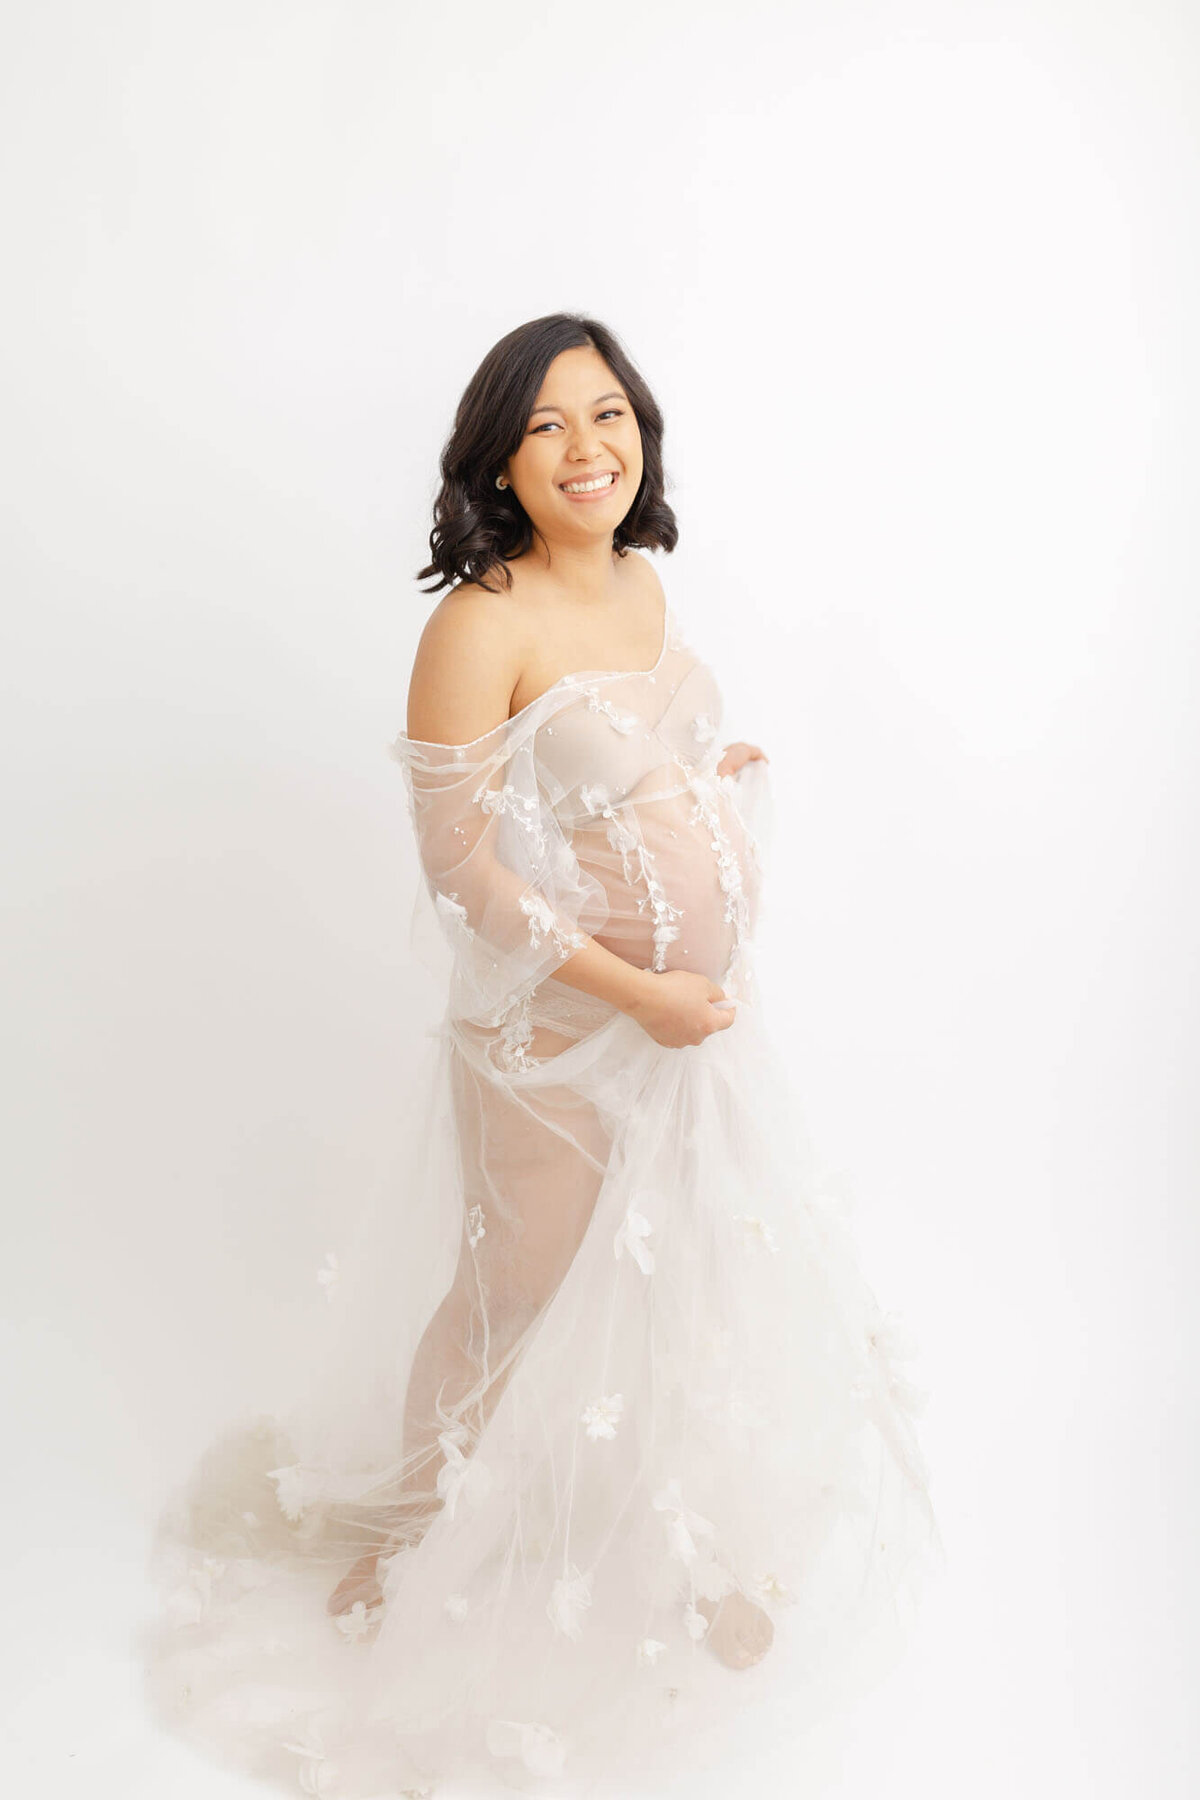 Pregnant Woman in see-through tulle dress with beading work on it. She is swaying her dress a bit and smiling at the camera. She has shoulder-length black hair in loose curls and professional hair and makeup done for her maternity portrait session in an all-white photography studio in Portland, OR. Photo by Ashlie Behm Photography